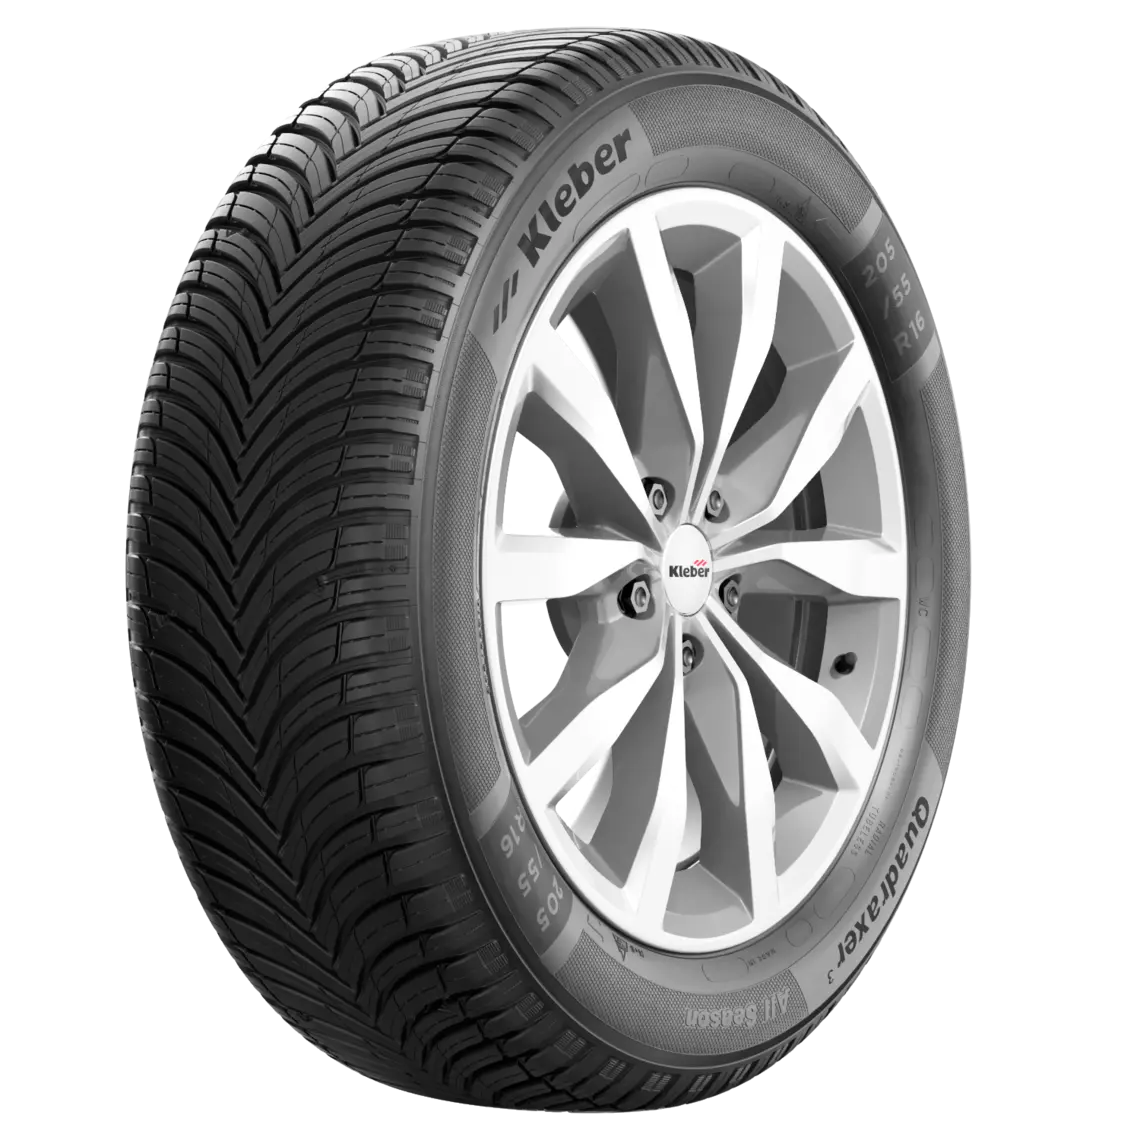 Kleber Quadraxer 3 - Tire Reviews and Tests